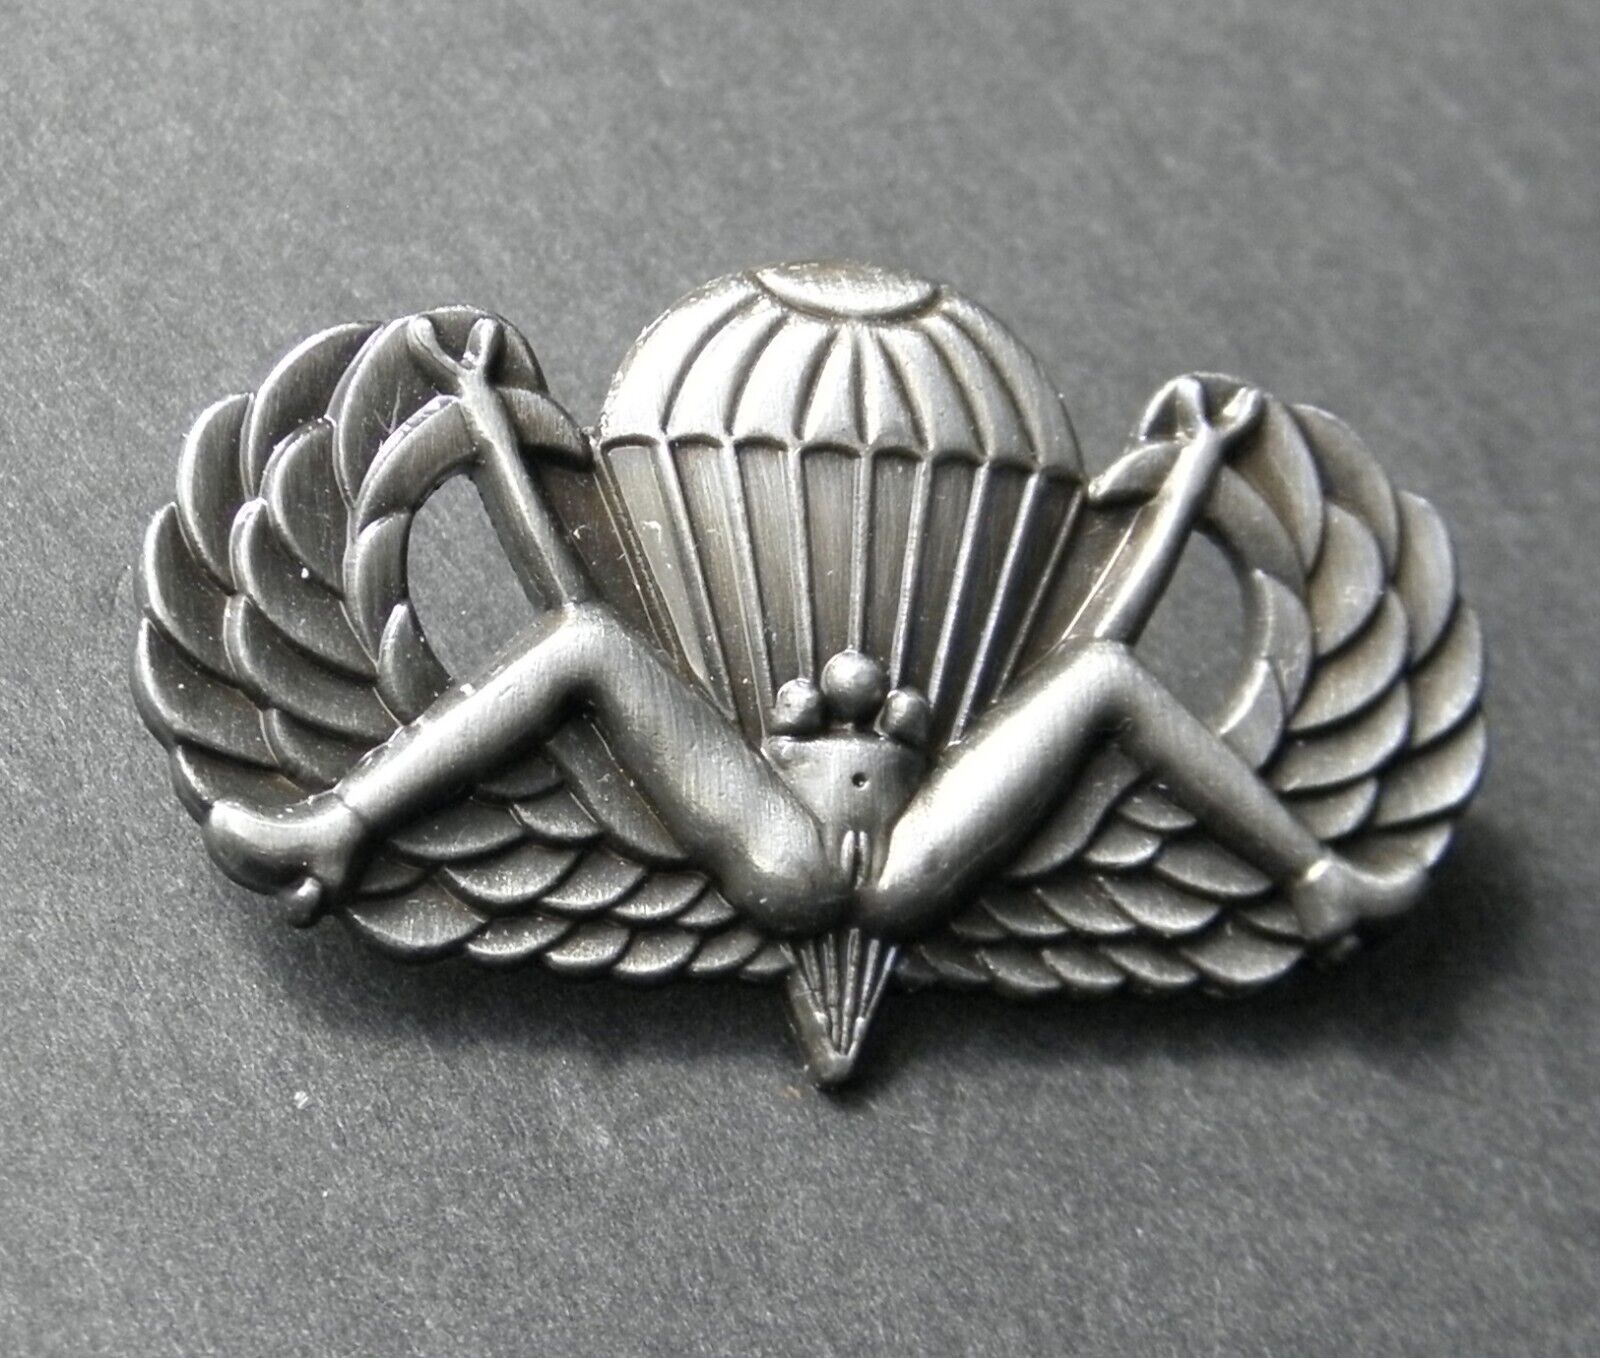 ARMY PARA PARATROOPER AIRBORNE BUSH JUMP WINGS BADGE LAPEL PIN 1.6 INCHES